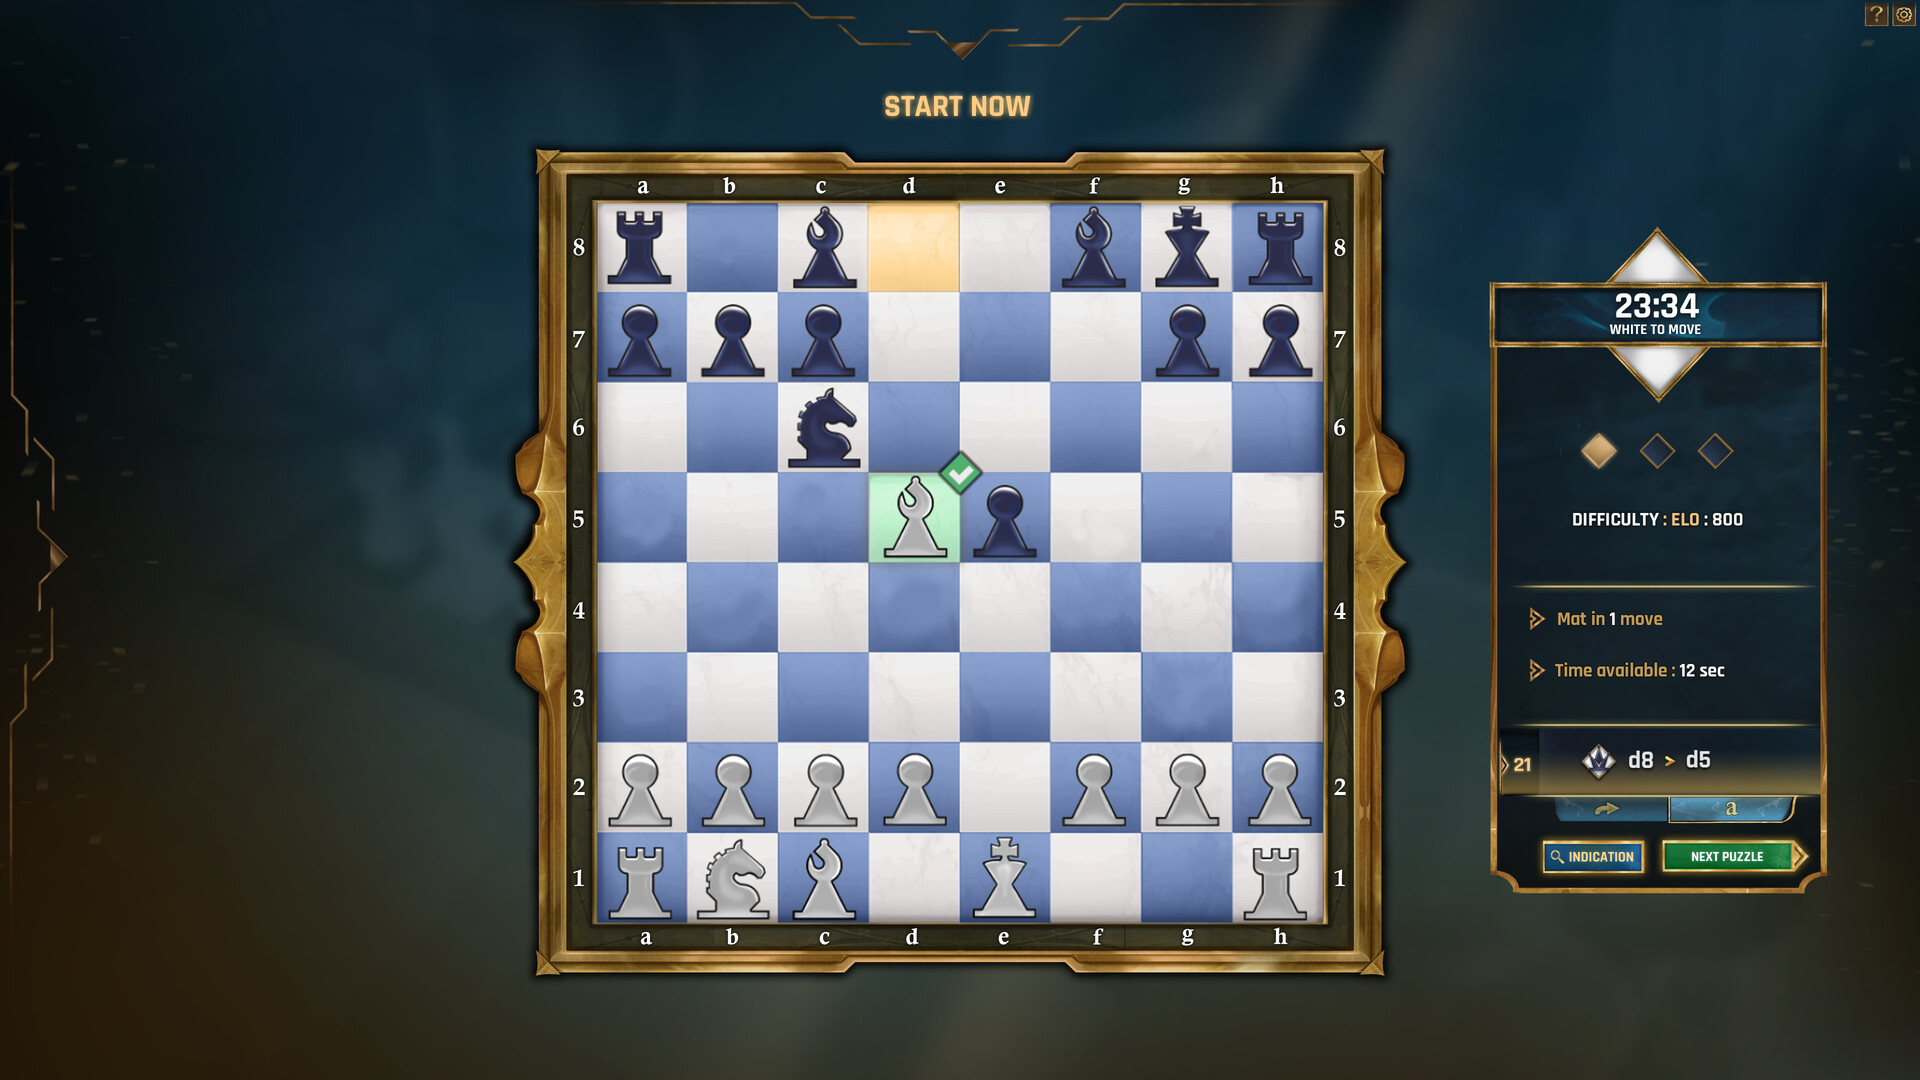 Download Grand Master Chess Online 2.5 for Windows 